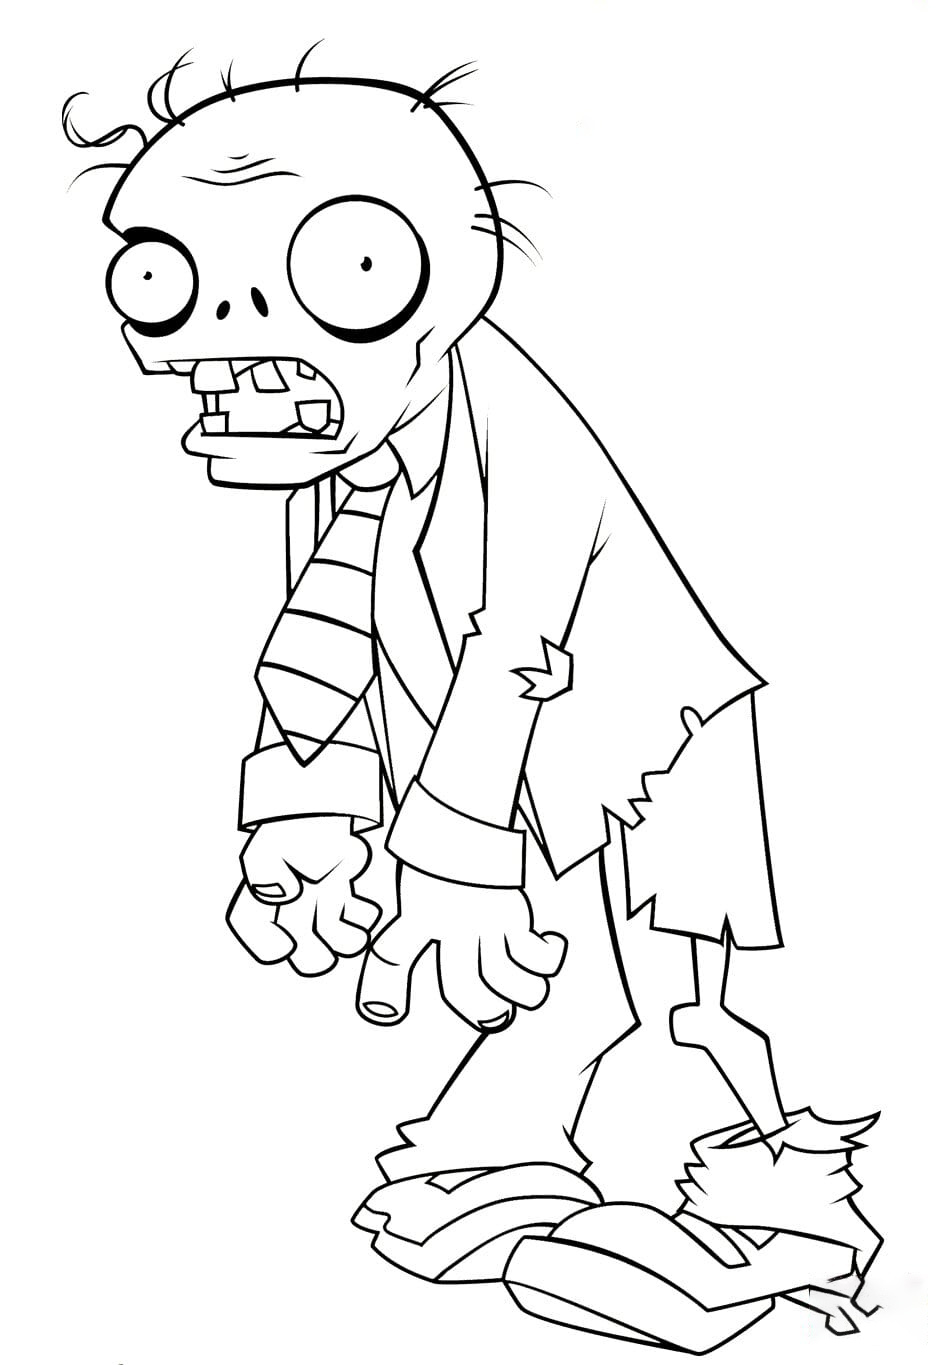 Basic Zombie from Plants vs Zombies